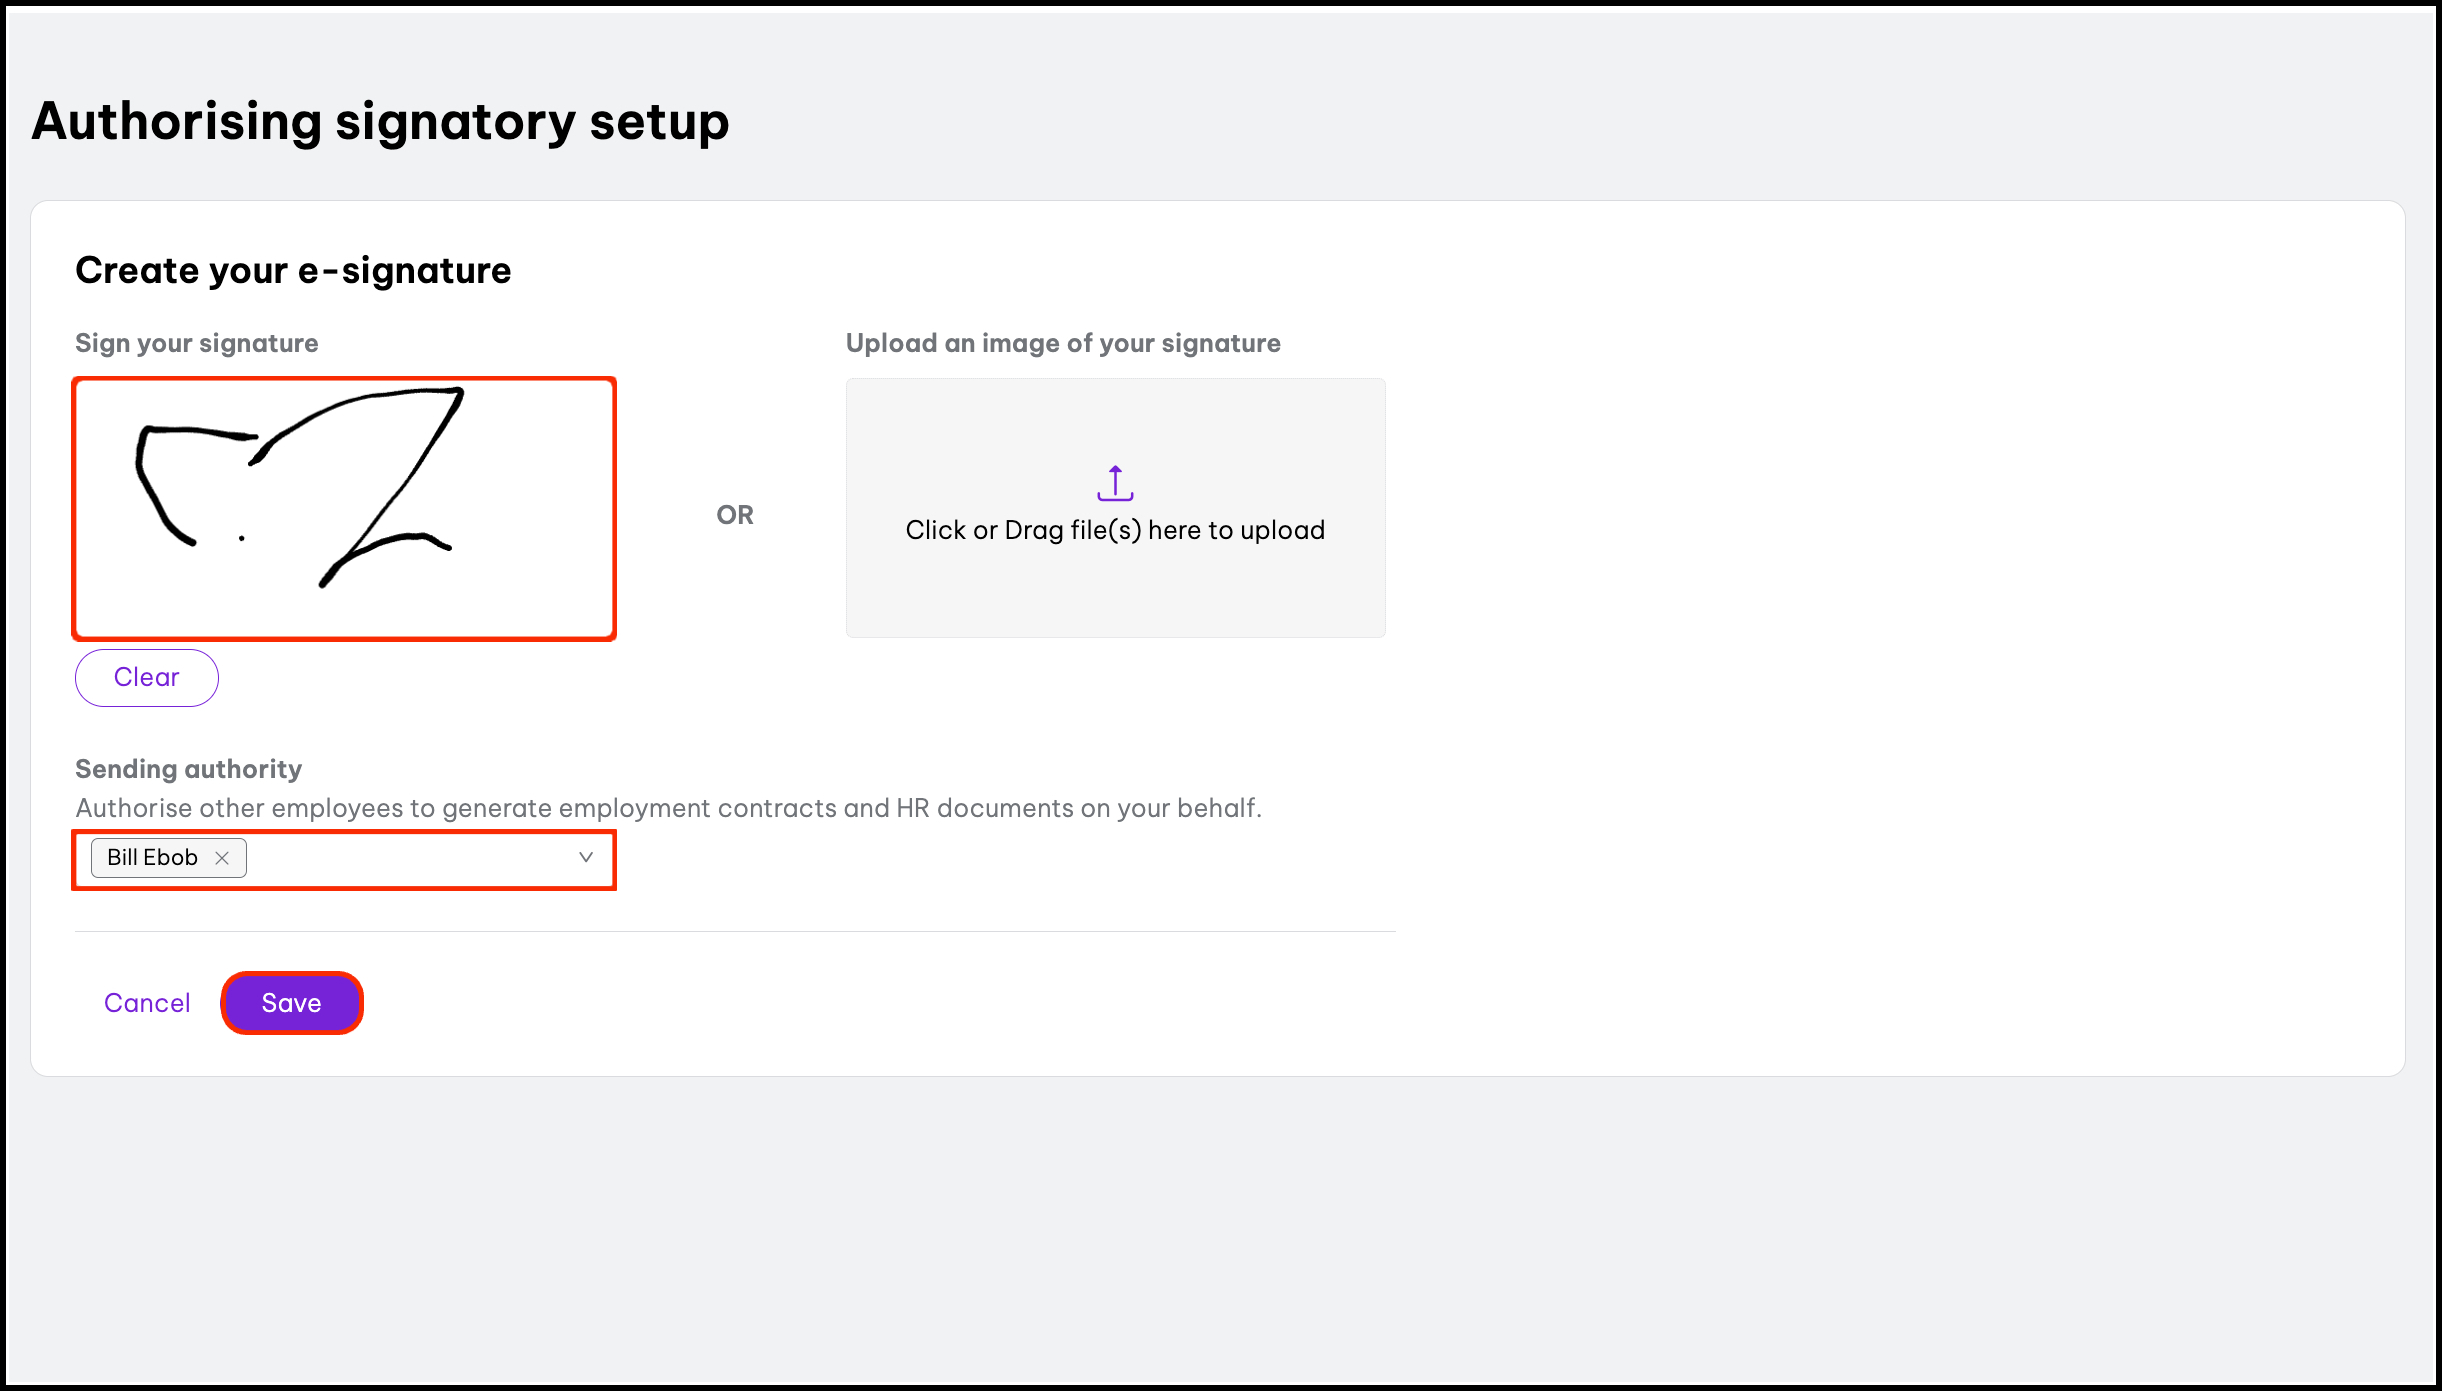 2. Screenshot of authorising signatory setup. There is a box for creating your e-signature or options to upload a file, choose the sending authority, cancel or save.